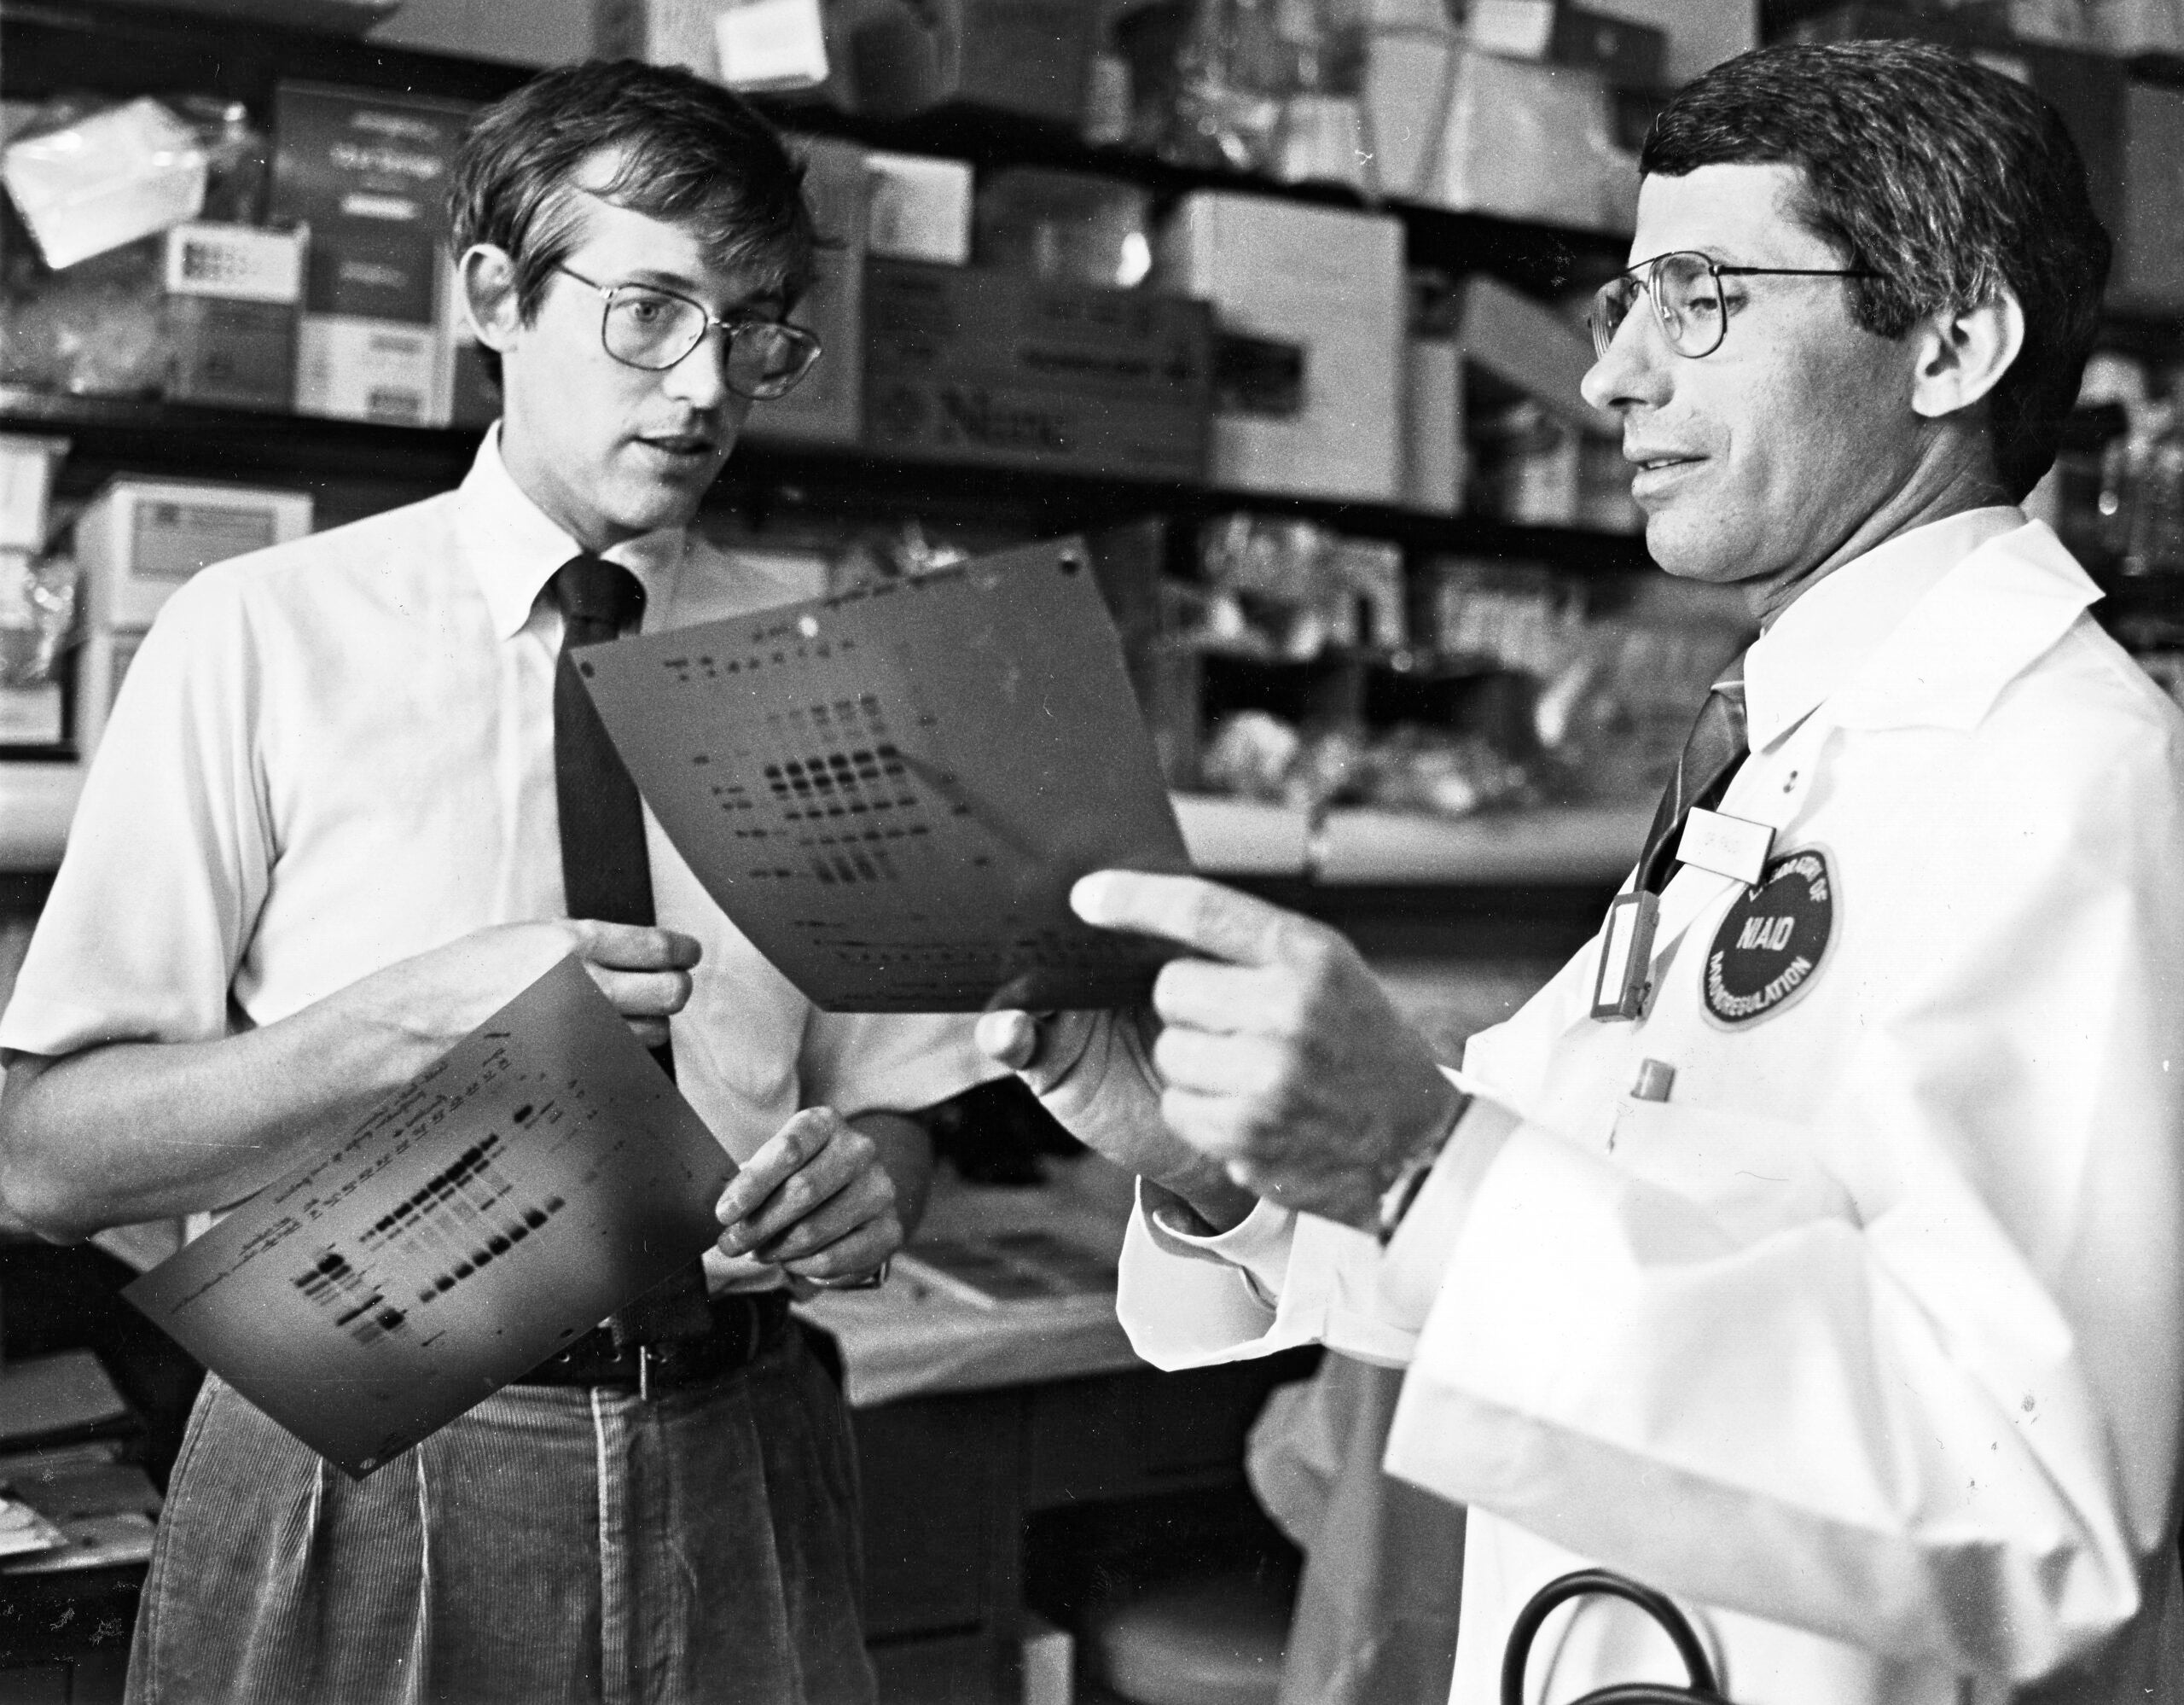 Anthony Fauci and HIV/AIDS research colleague in black and white photo